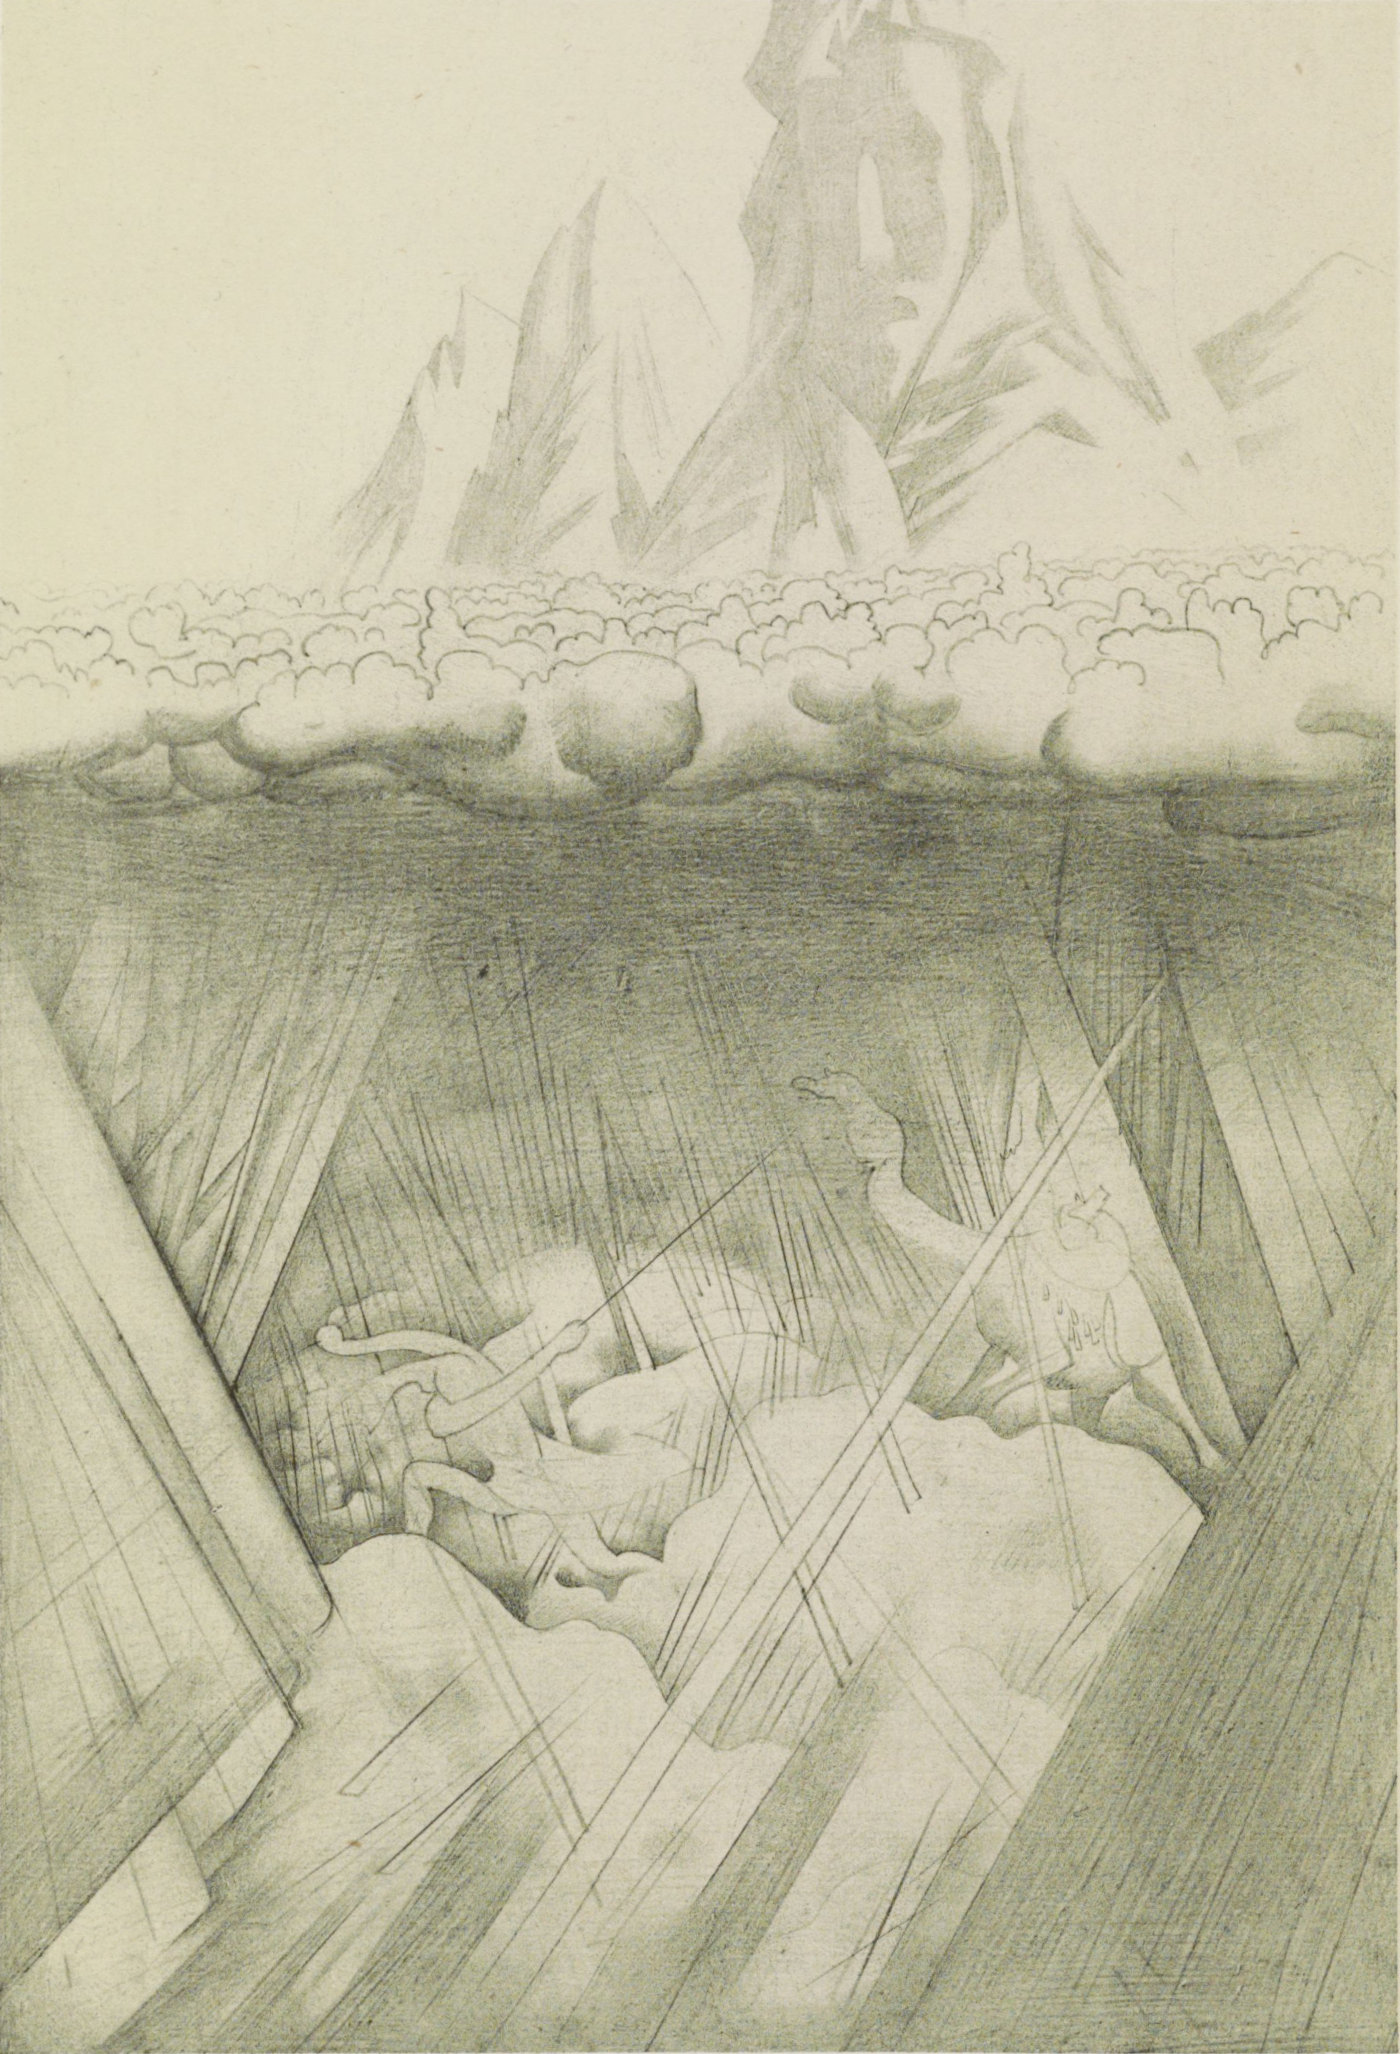 An abstract pencil drawing of large mountains in the background, with the foremost one resembling a man’s face. There are clouds at the base of the mountains, and below the clouds is a man dragging a camel by a rope.